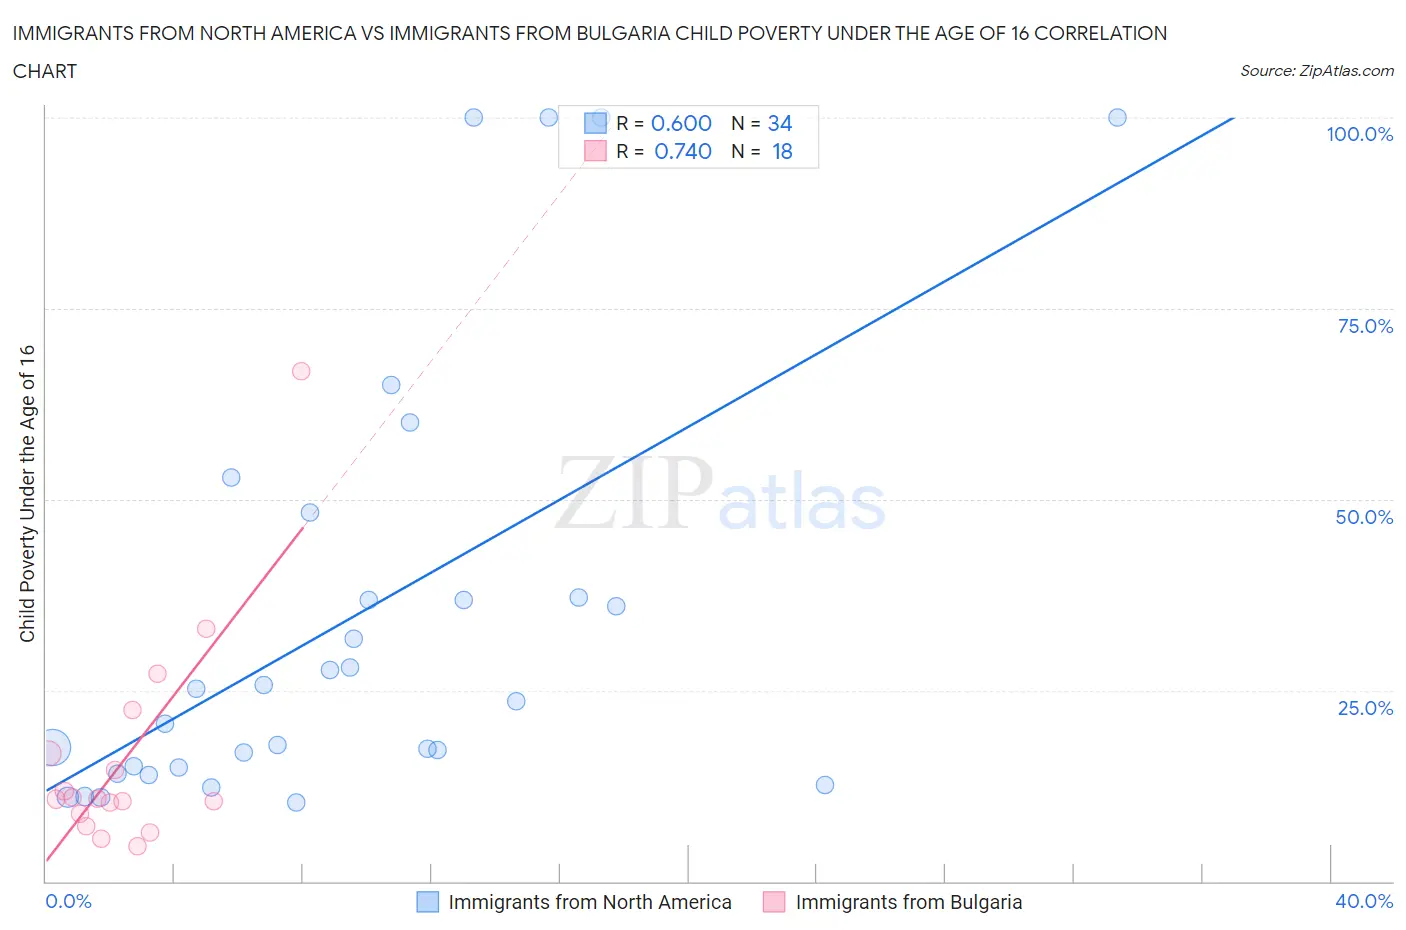 Immigrants from North America vs Immigrants from Bulgaria Child Poverty Under the Age of 16